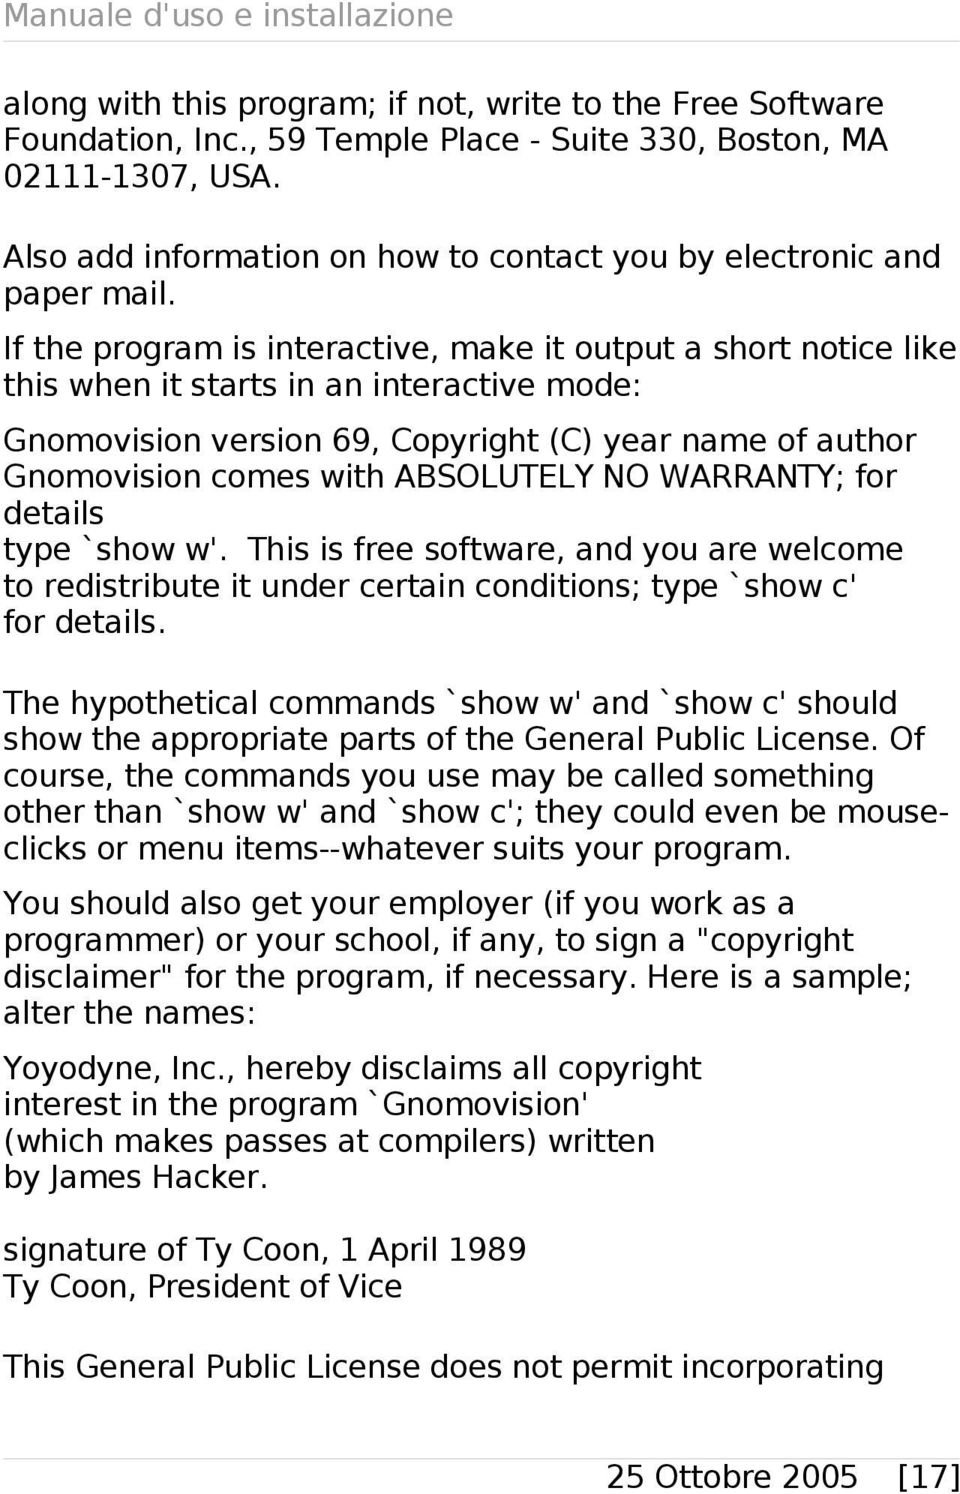 If the program is interactive, make it output a short notice like this when it starts in an interactive mode: Gnomovision version 69, Copyright (C) year name of author Gnomovision comes with